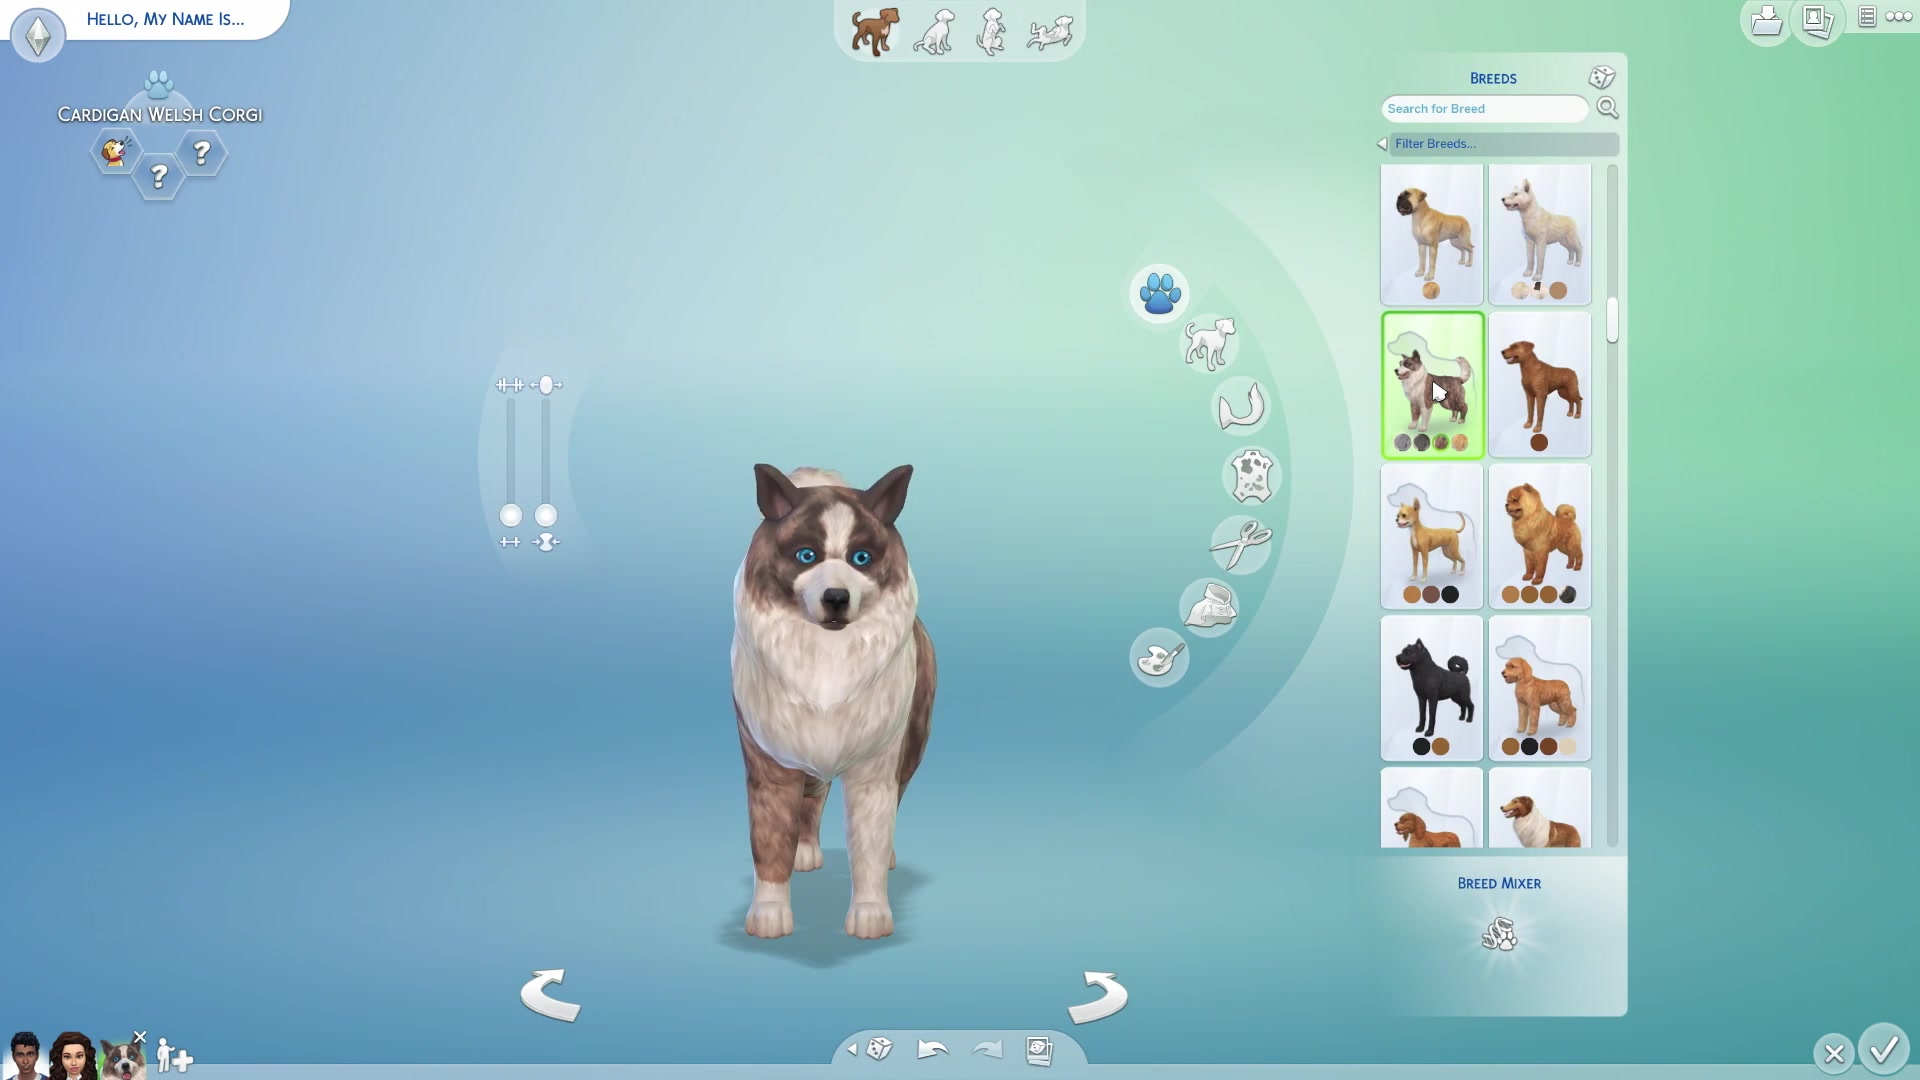 easy and legit way to get the sims 4 cats and dogs for free